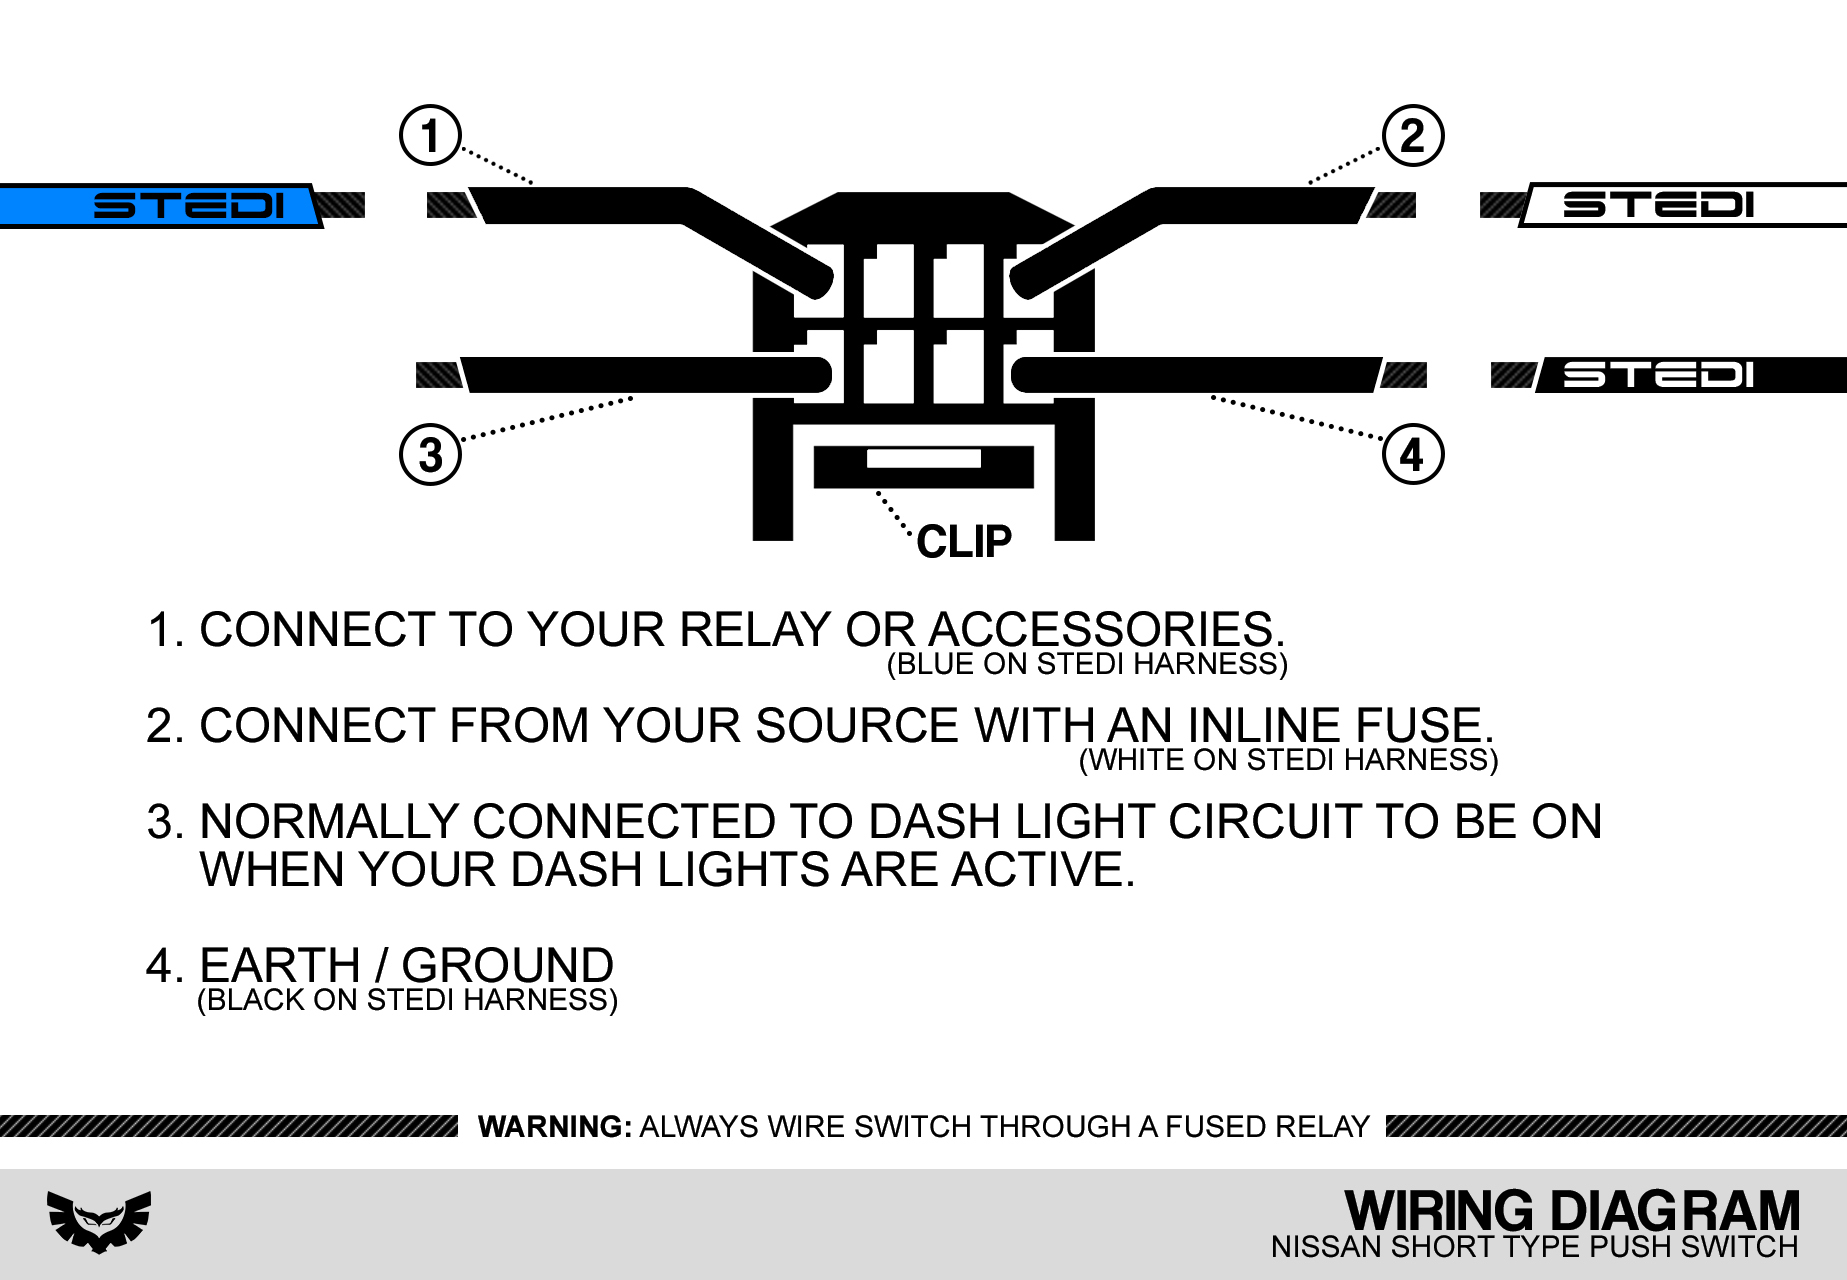 Wiring Diagram For Led Light Bar To High Beam from www.stedi.com.au